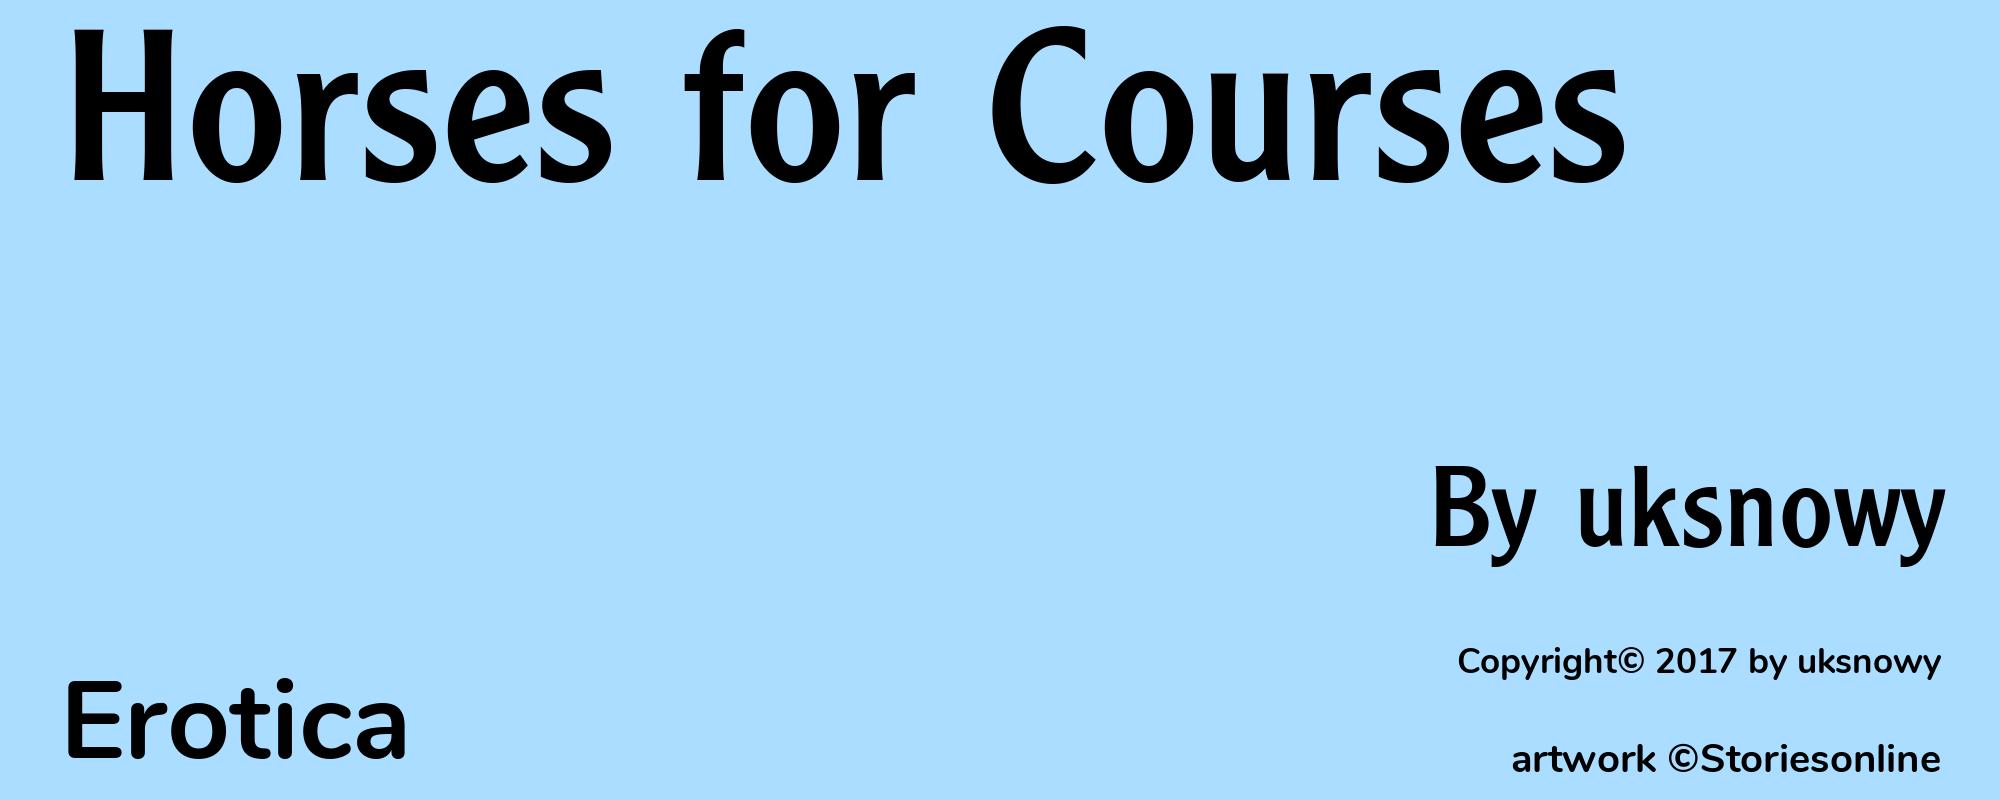 Horses for Courses - Cover